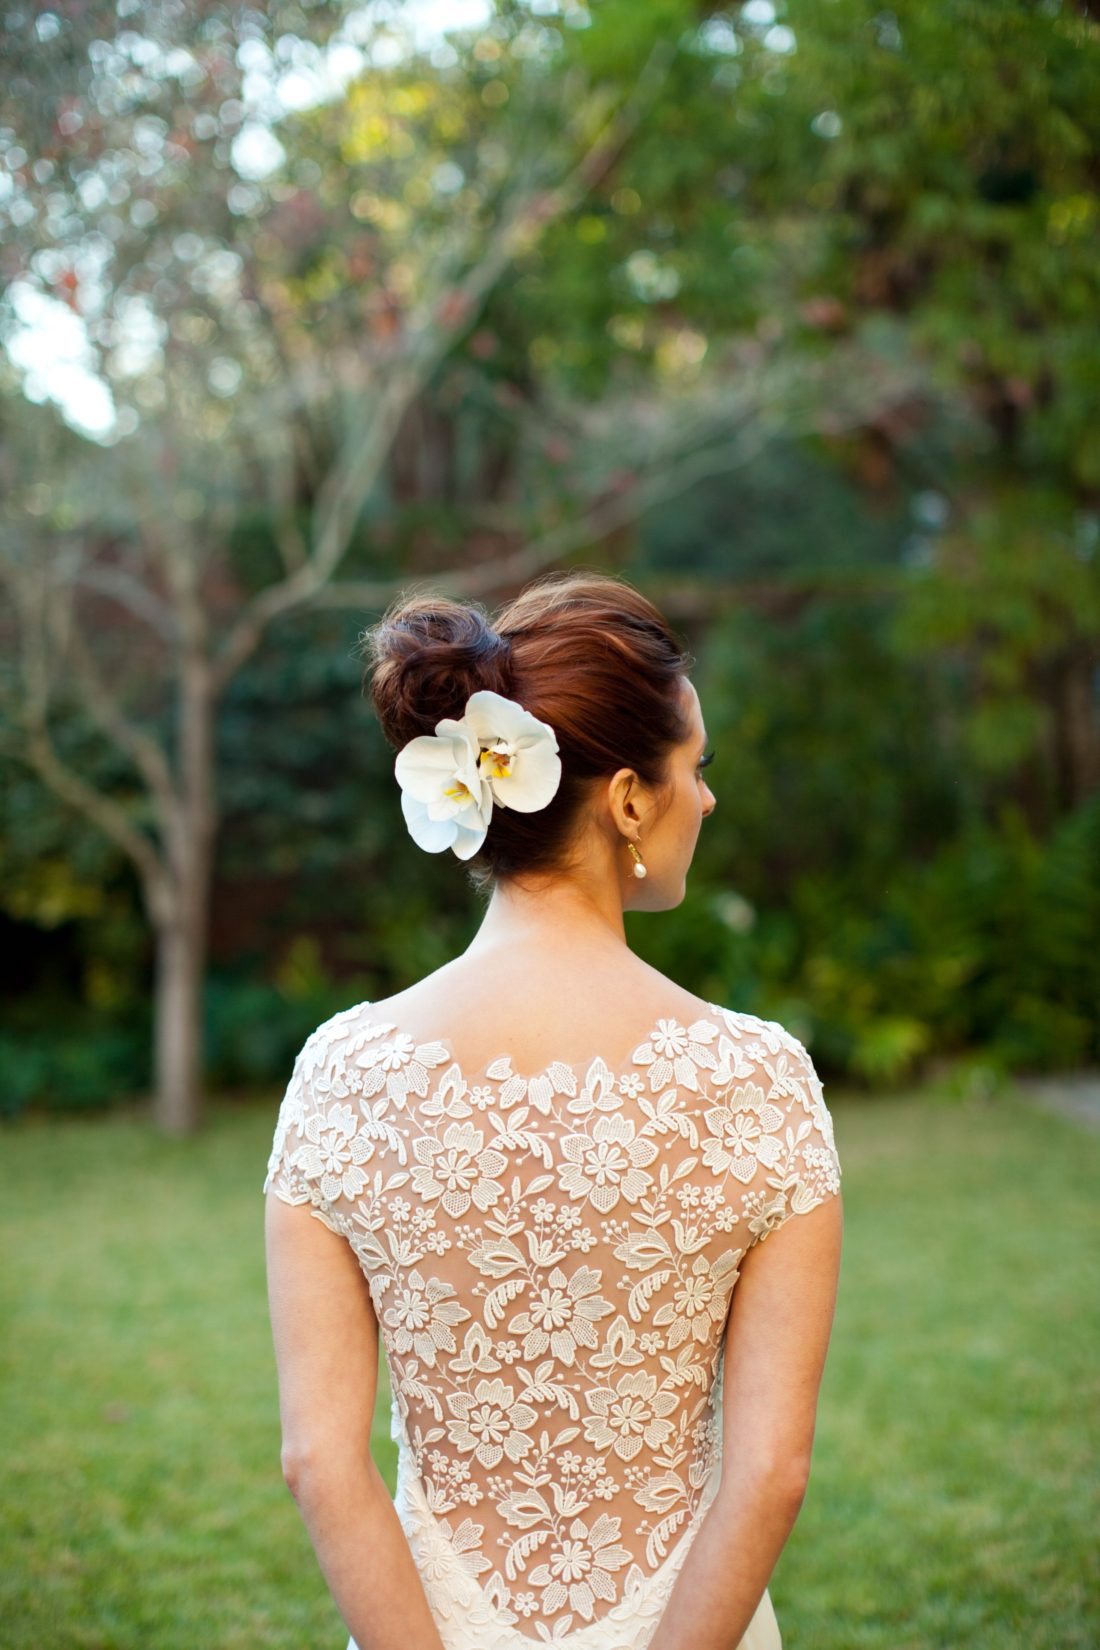 The back detail of Eva Amurri Martino's Lela Rose wedding dress, worn with a high bun hairstyle and two white orchids pinned in the back